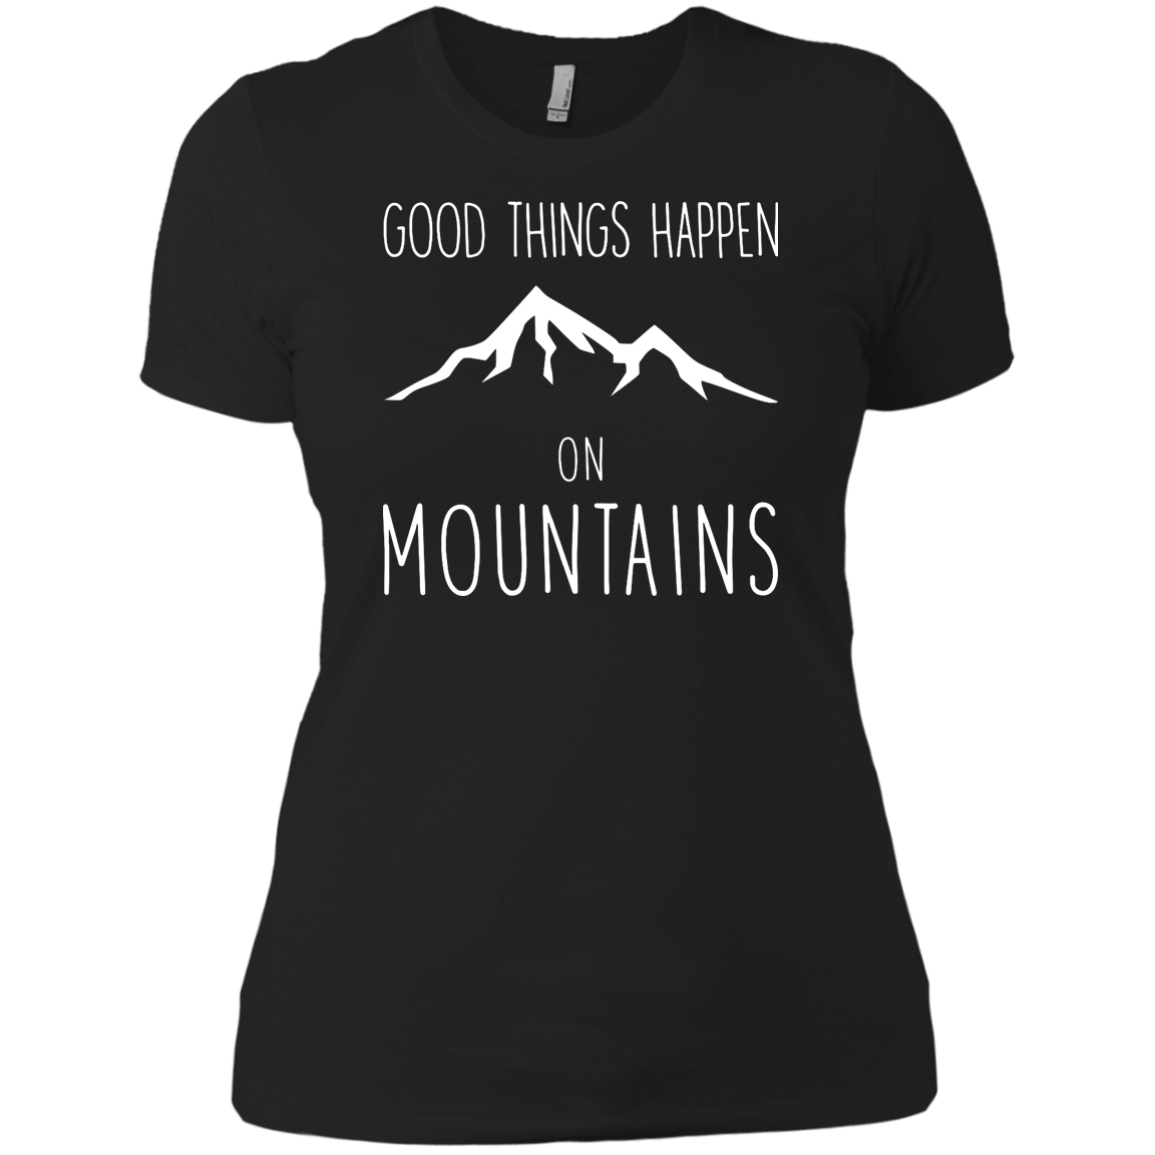 Good Things Happen On The Mountains Ladies Tees and V-Neck - Powderaddicts